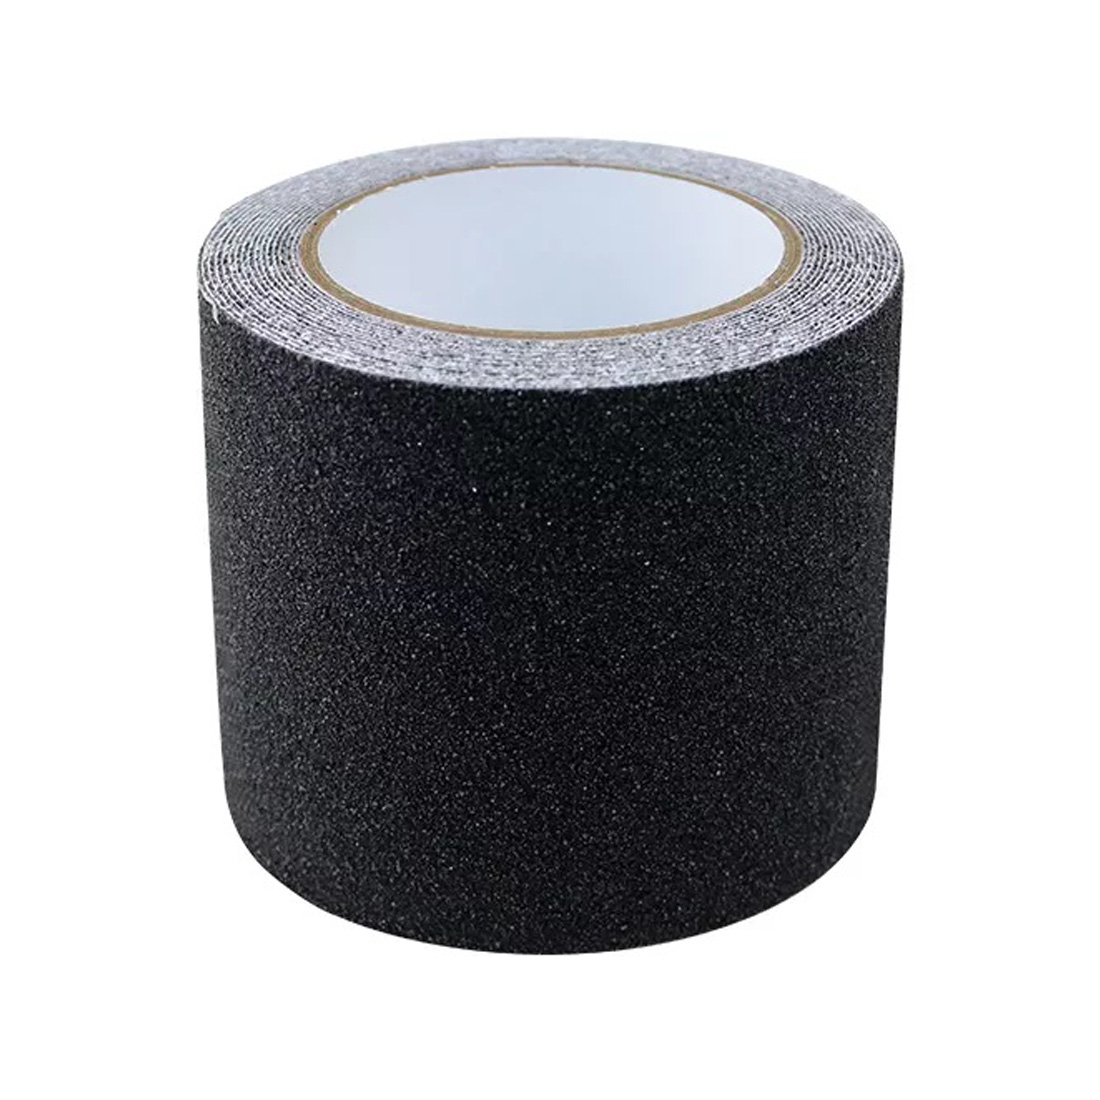 Best Industrial Grip Tape Buying Guide In 2023 - EONBON GRIP TAPE